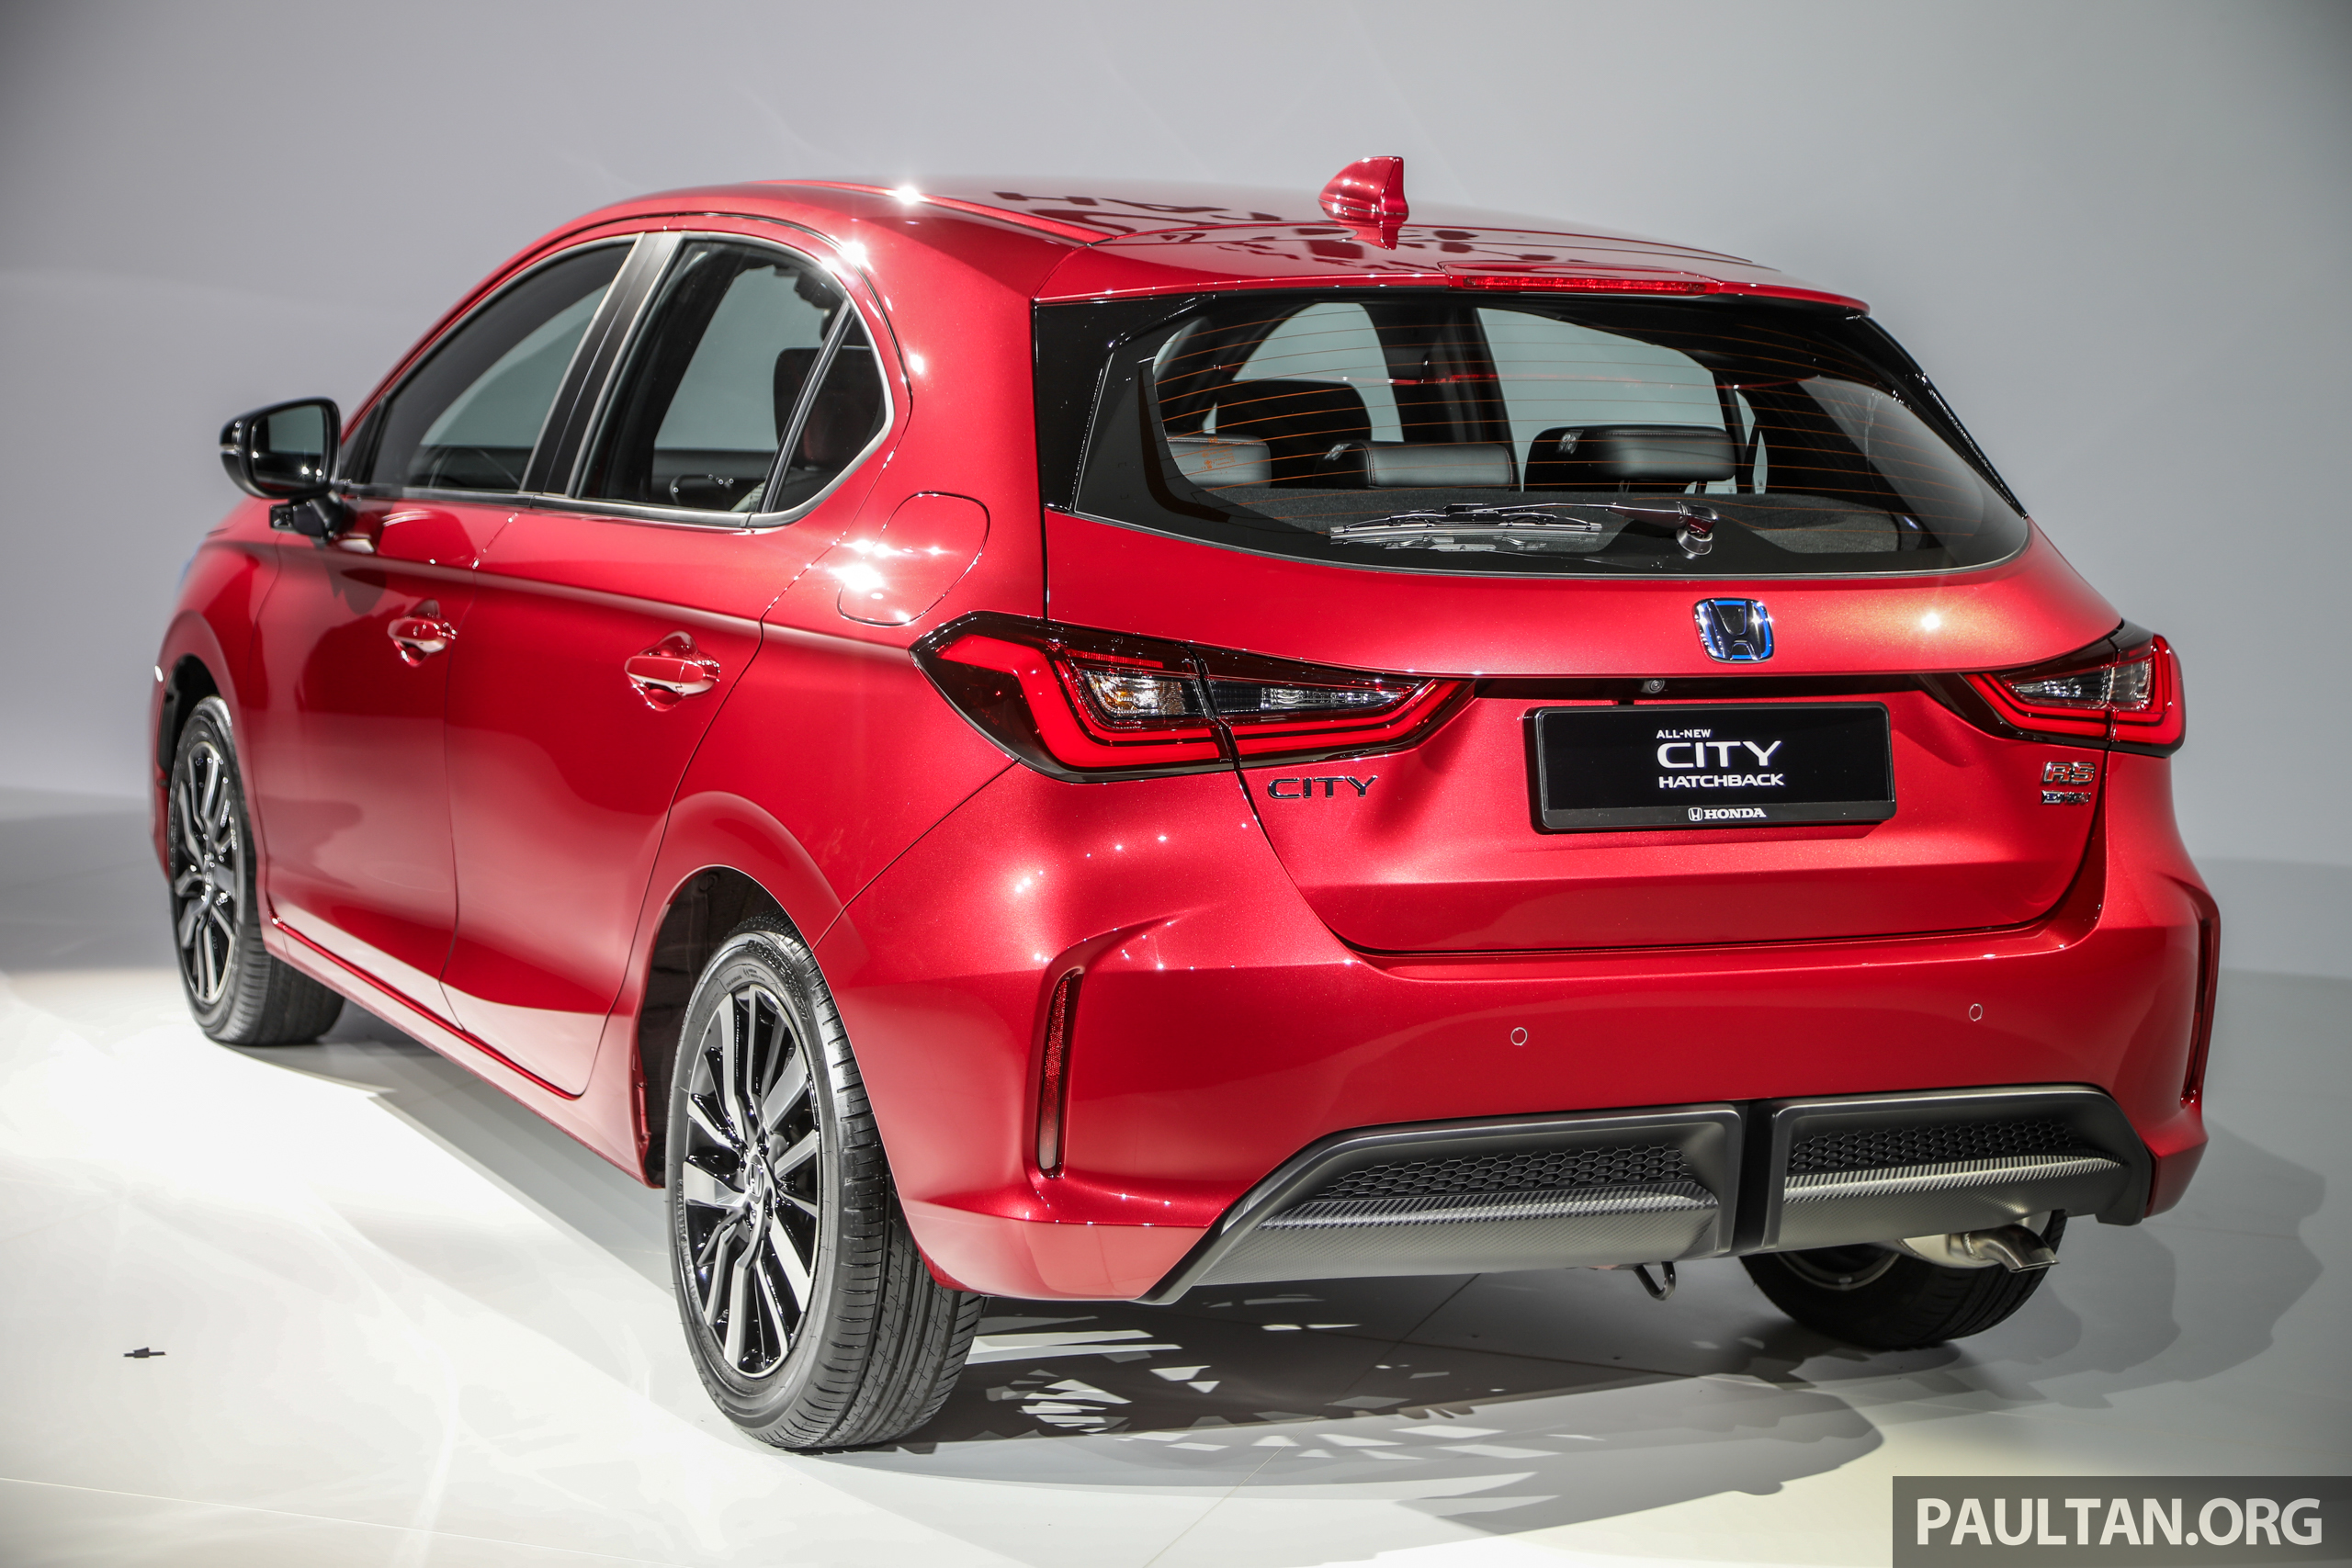 Honda City Hatchback RS e:HEV priced at RM108k in Malaysia – hybrid five-door with Sensing - paultan.org